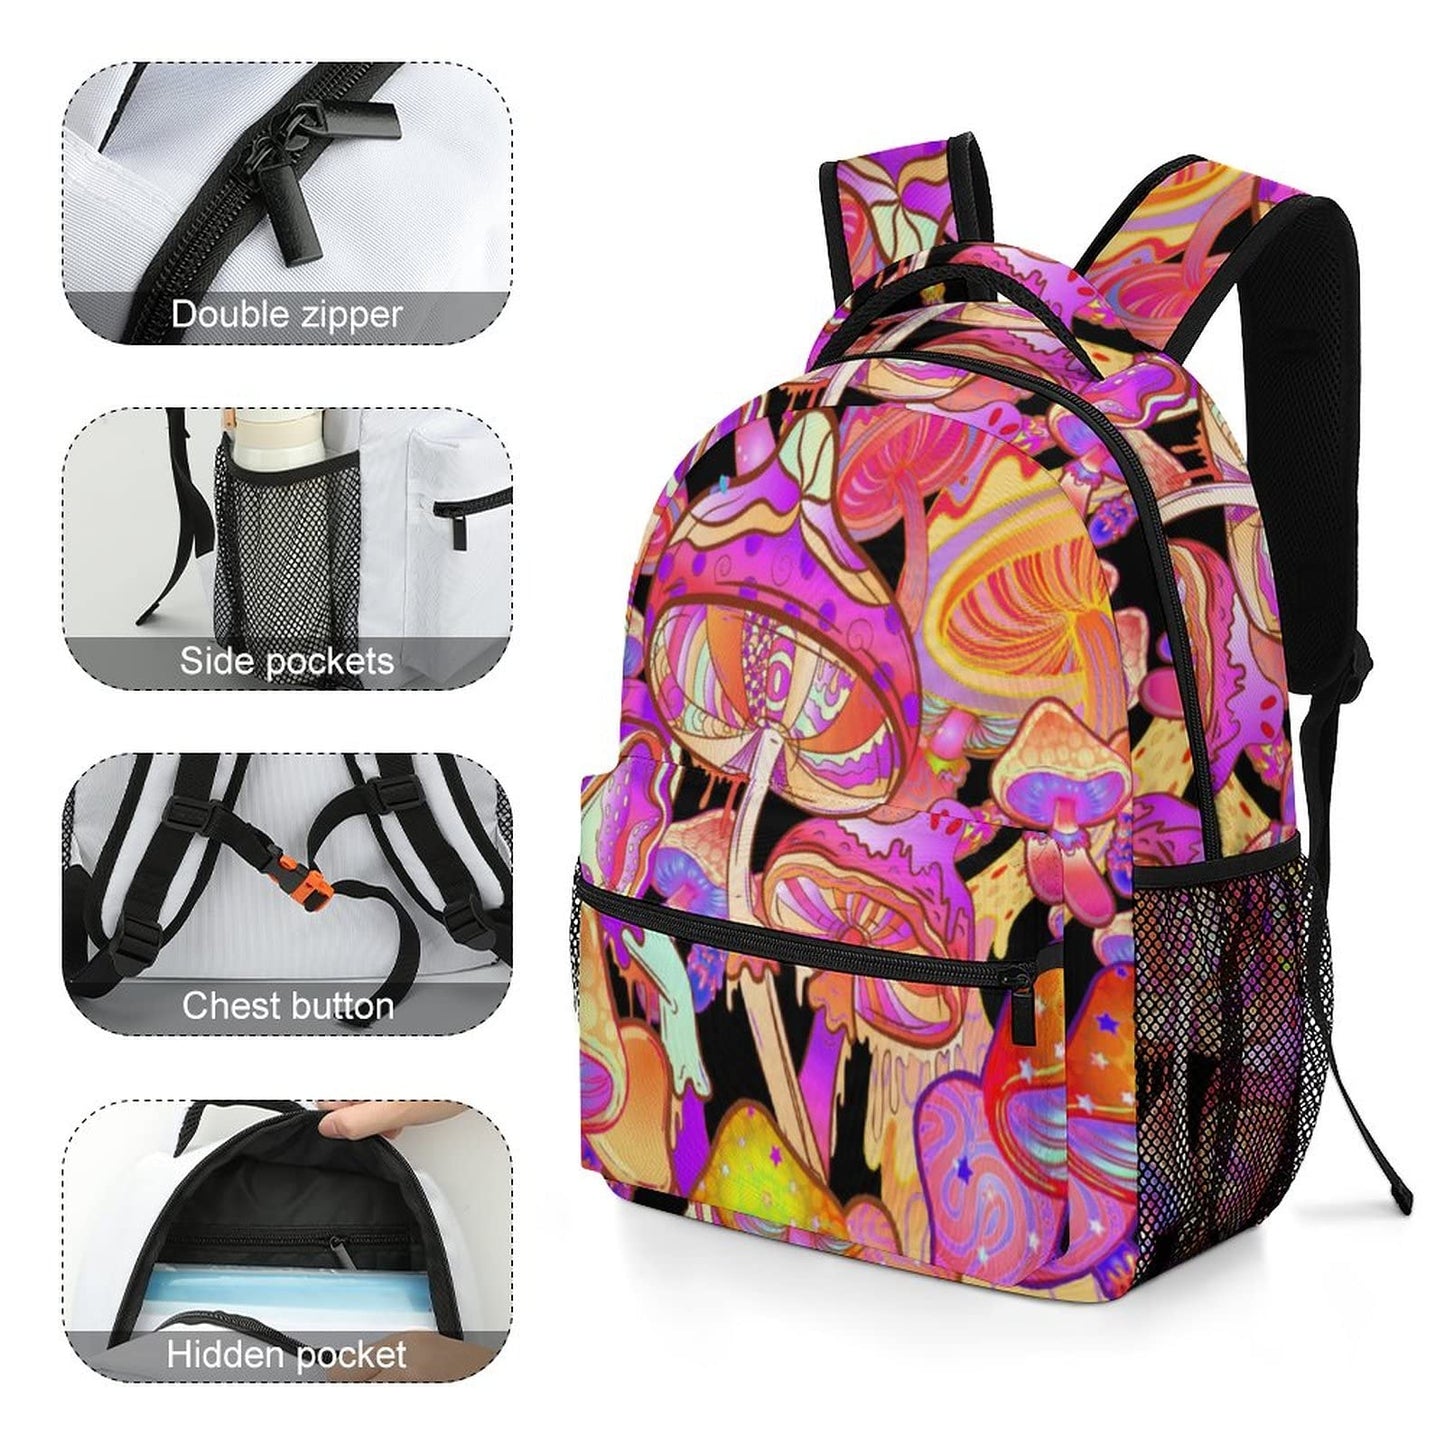 Wild Forest Mushrooms School Backpack Gifts Fashion Travel Laptop Backpack for Men Women Teenagers Children